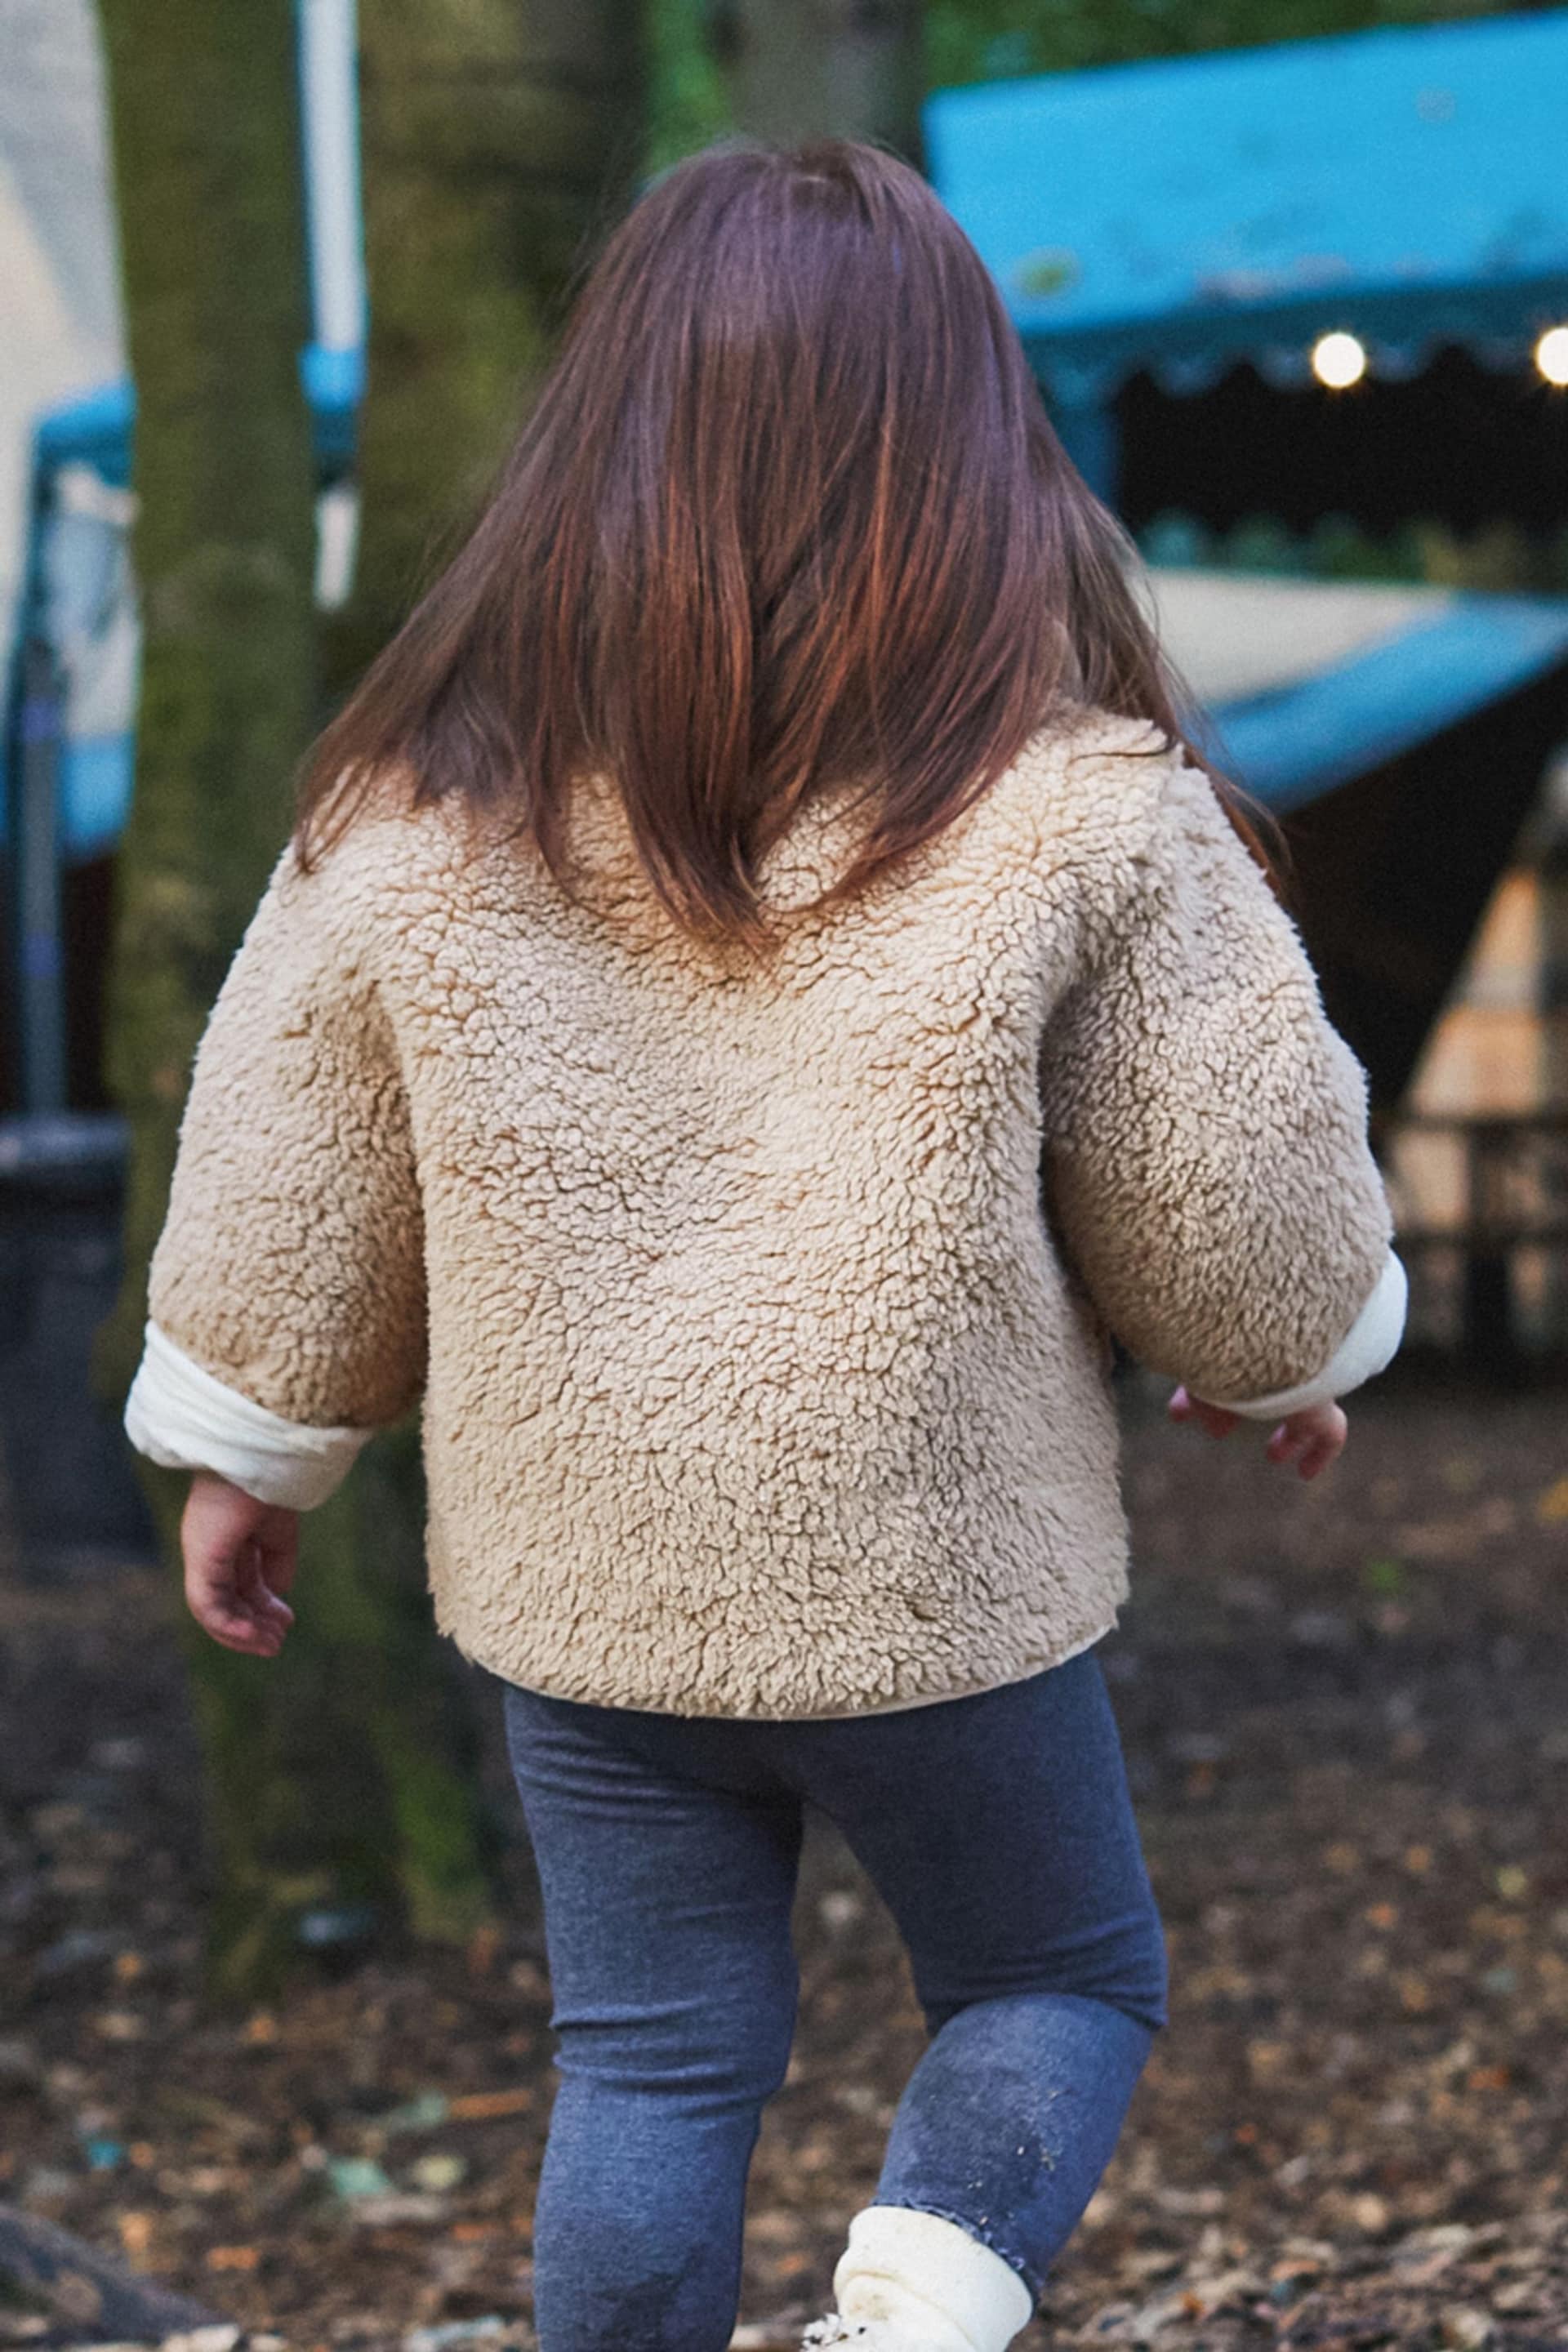 The Little Tailor Baby Natural Quilted Reversible Plush Lined Sherpa Fleece Jacket - Image 8 of 8